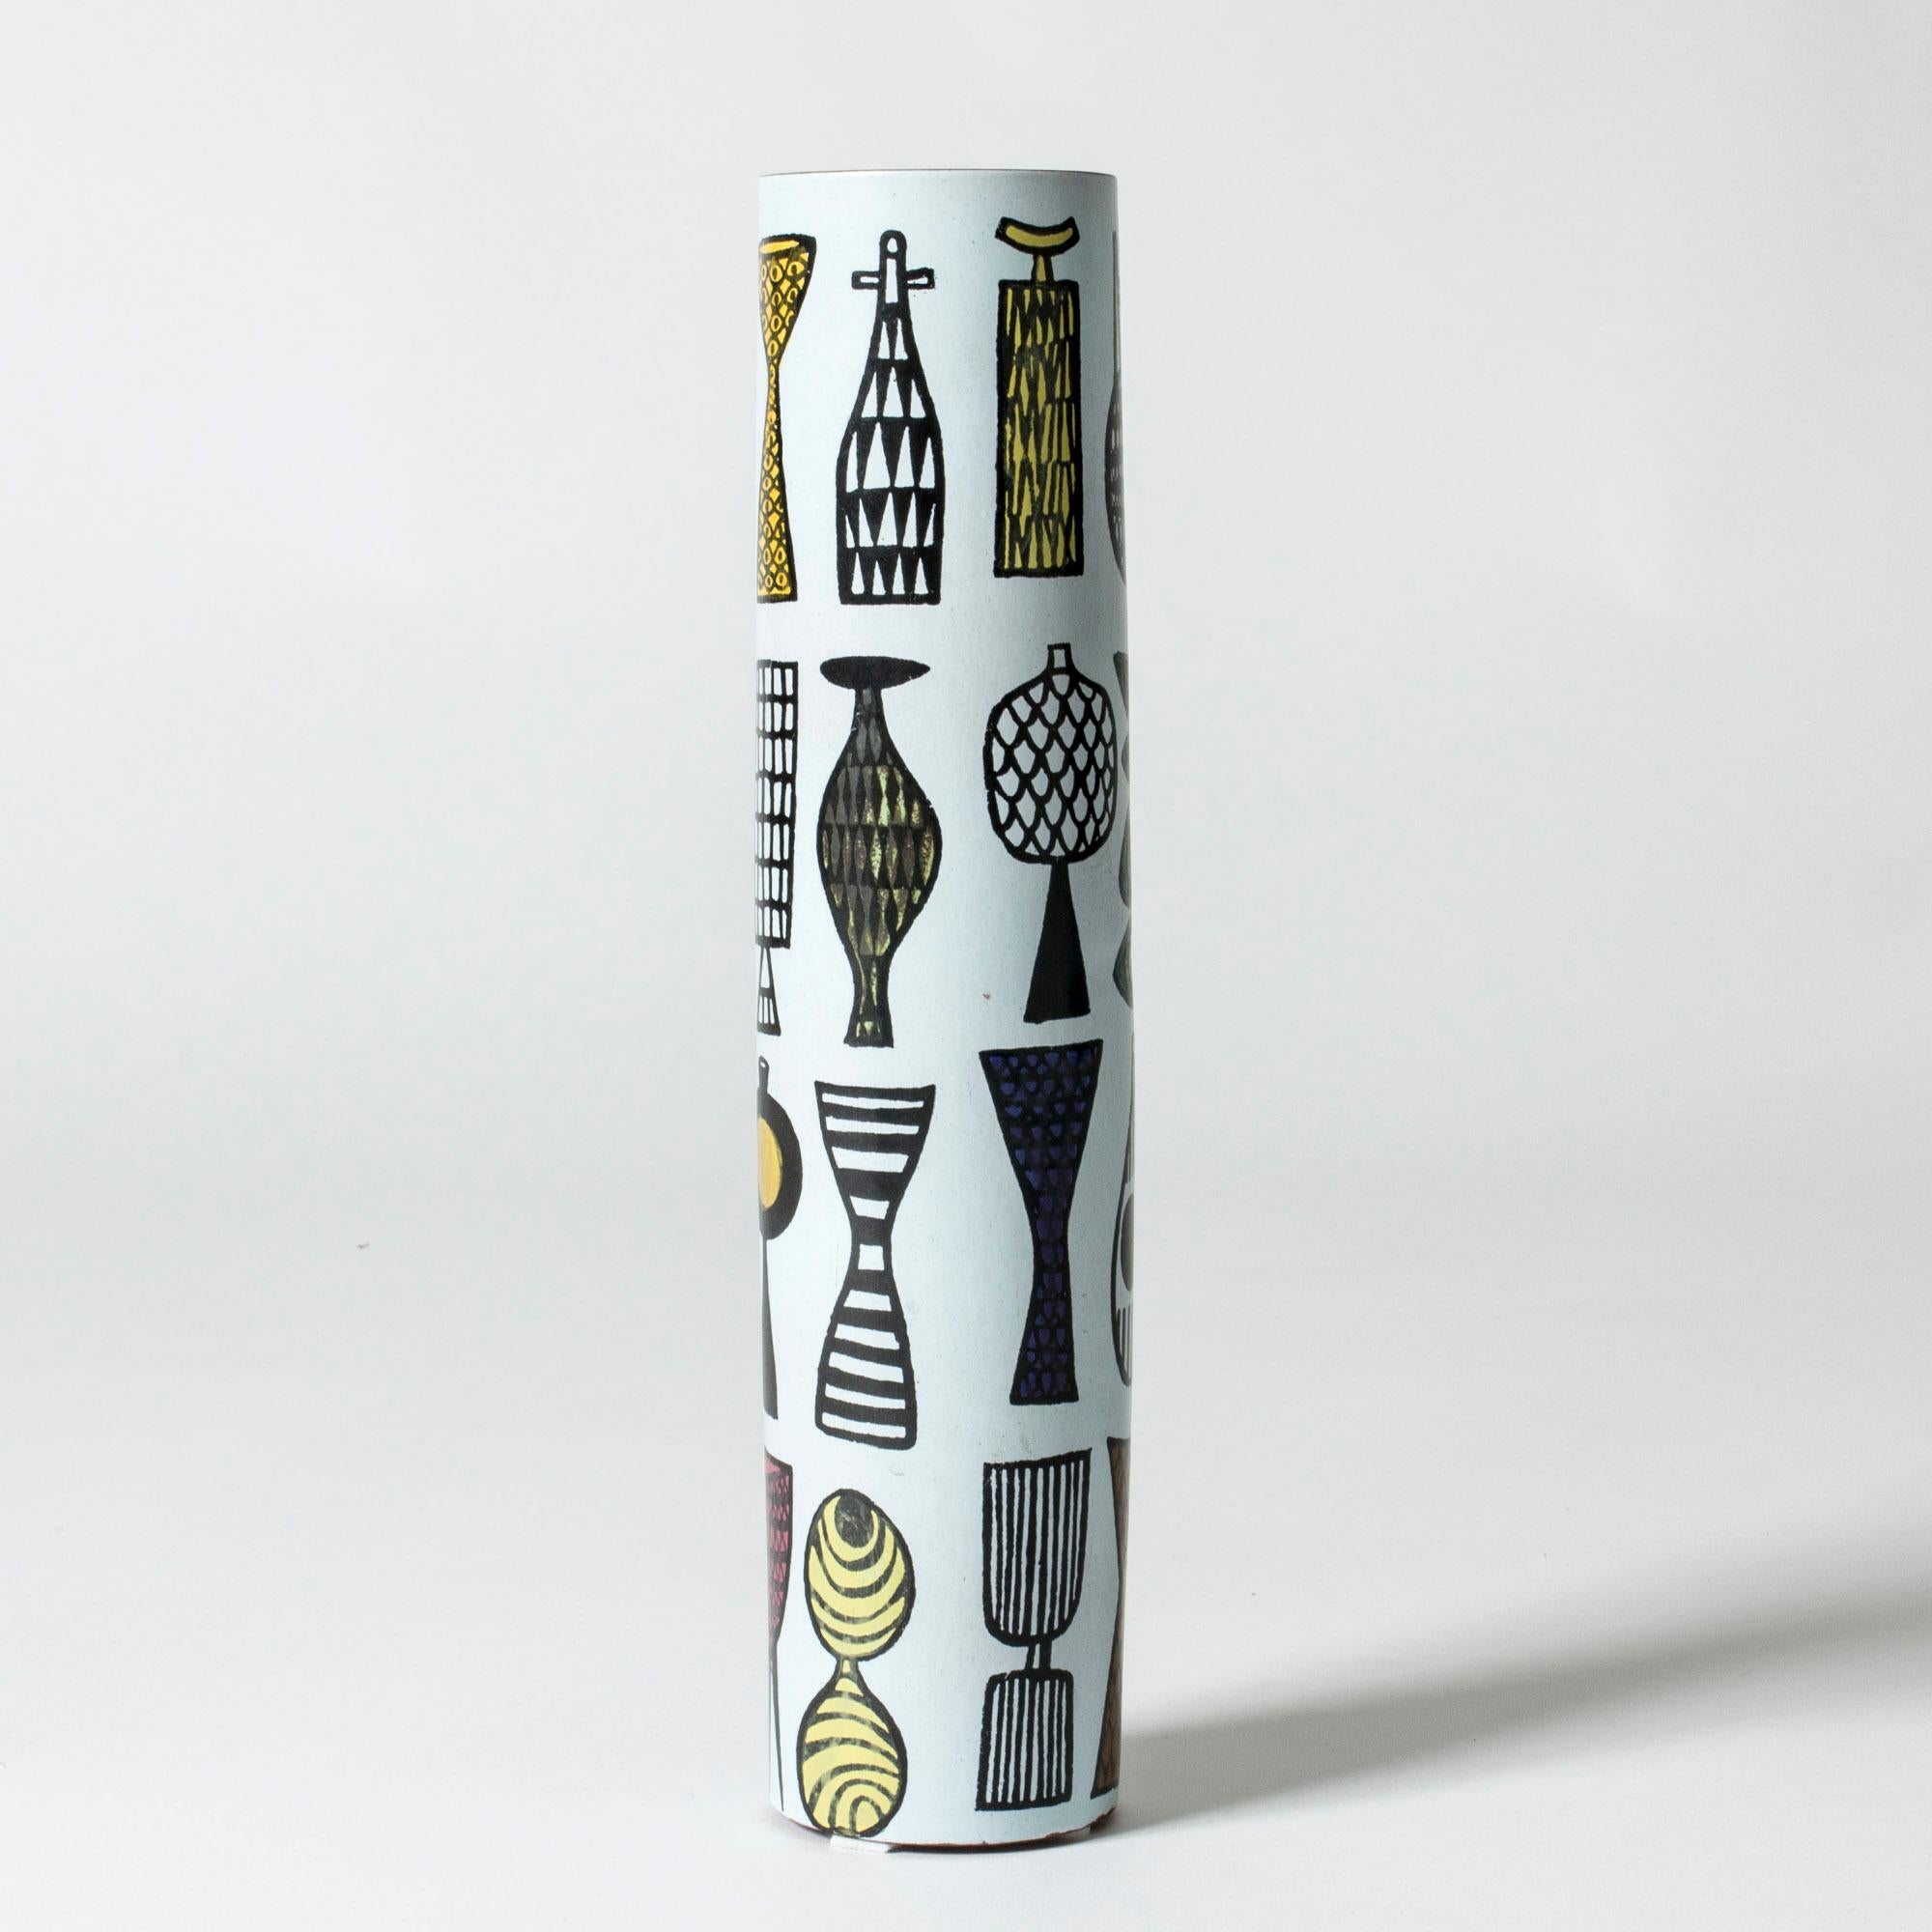 Faience “Karneval” vase by Stig Lindberg, in a long cylinder shape. Rare motif with a graphic look, of playful vases in different forms. The rim is unglazed, giving an organic touch to the smooth design.

The “Karneval” series was produced from